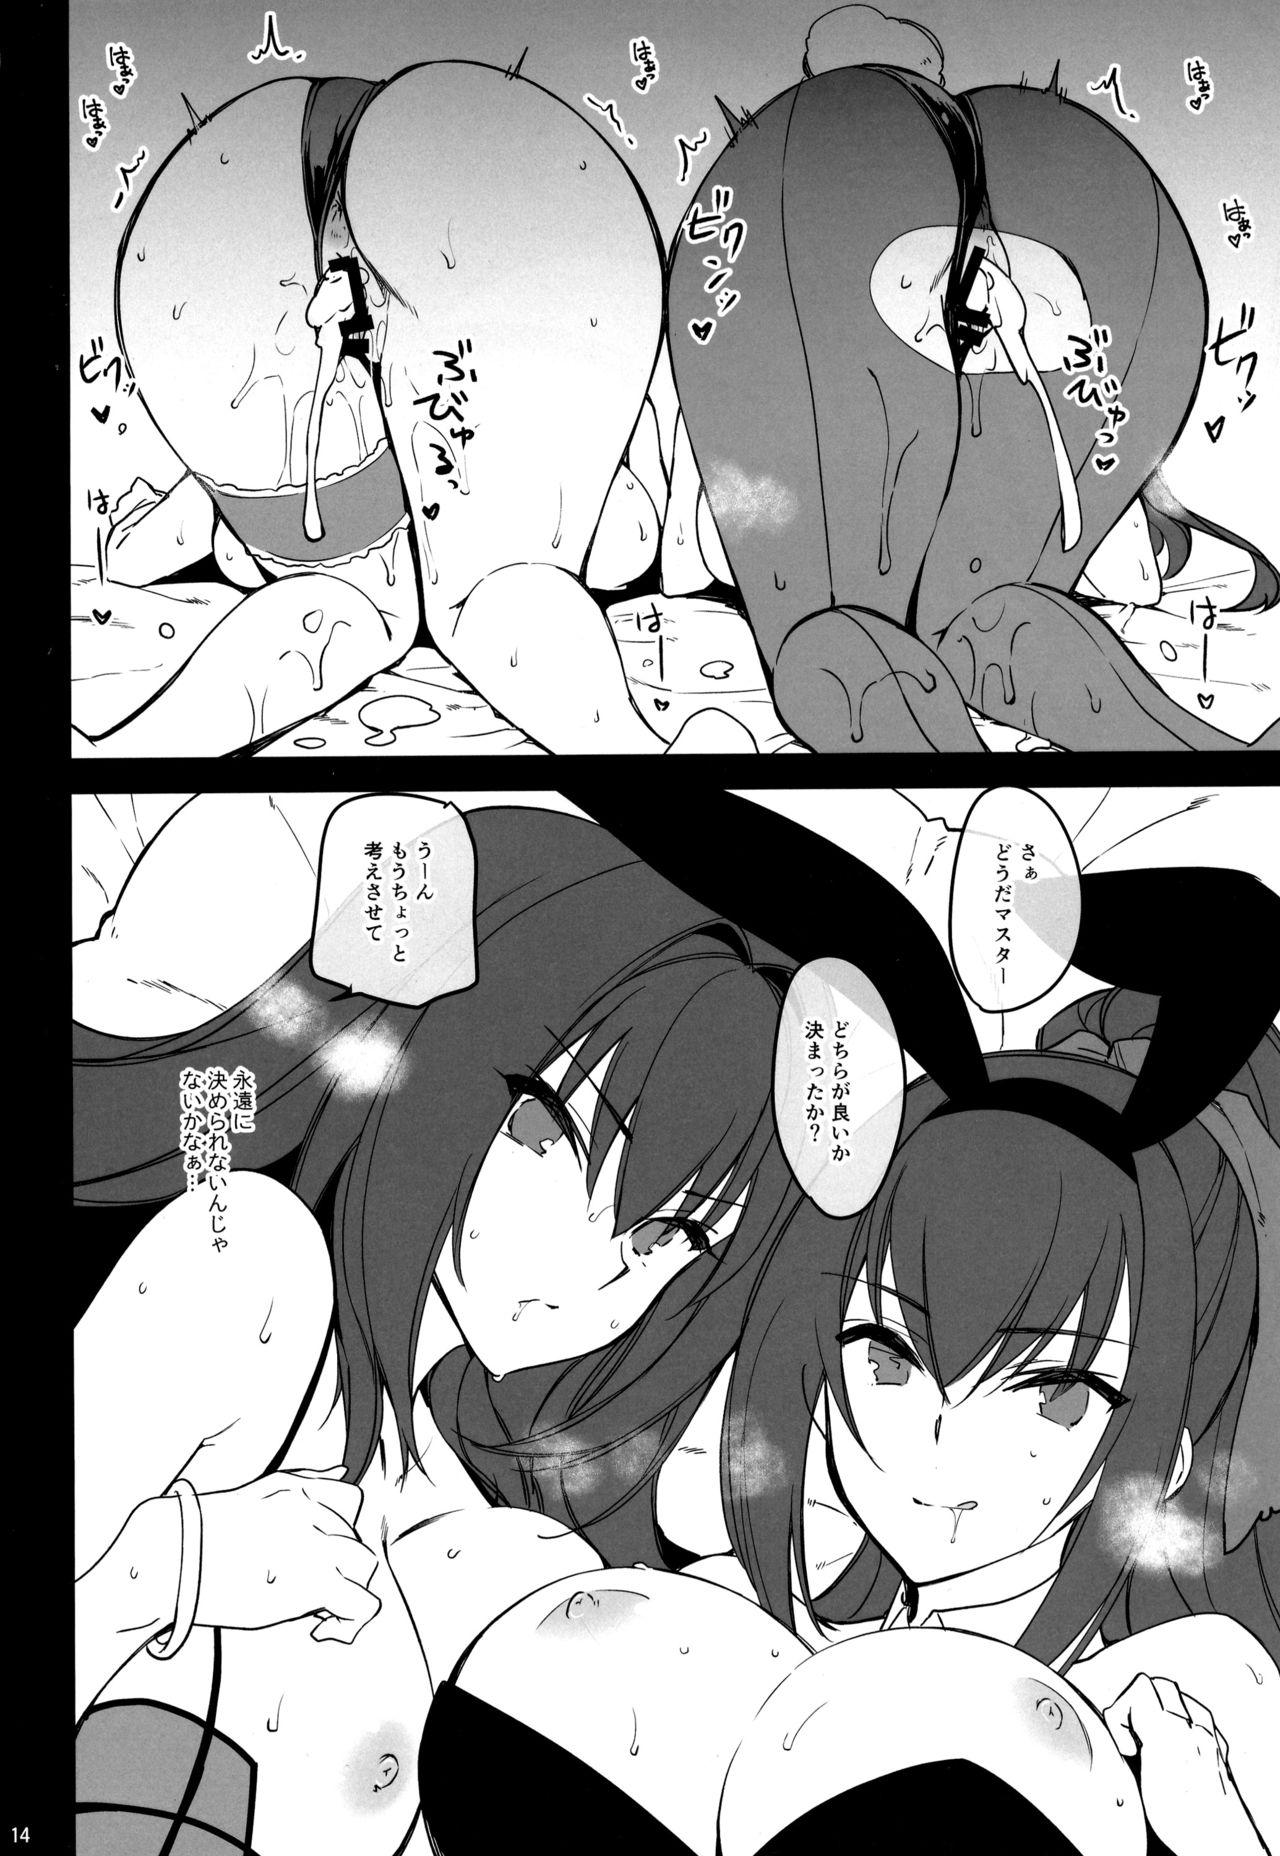 Cfnm Dochira no Scathach Show - Fate grand order Lovers - Page 12